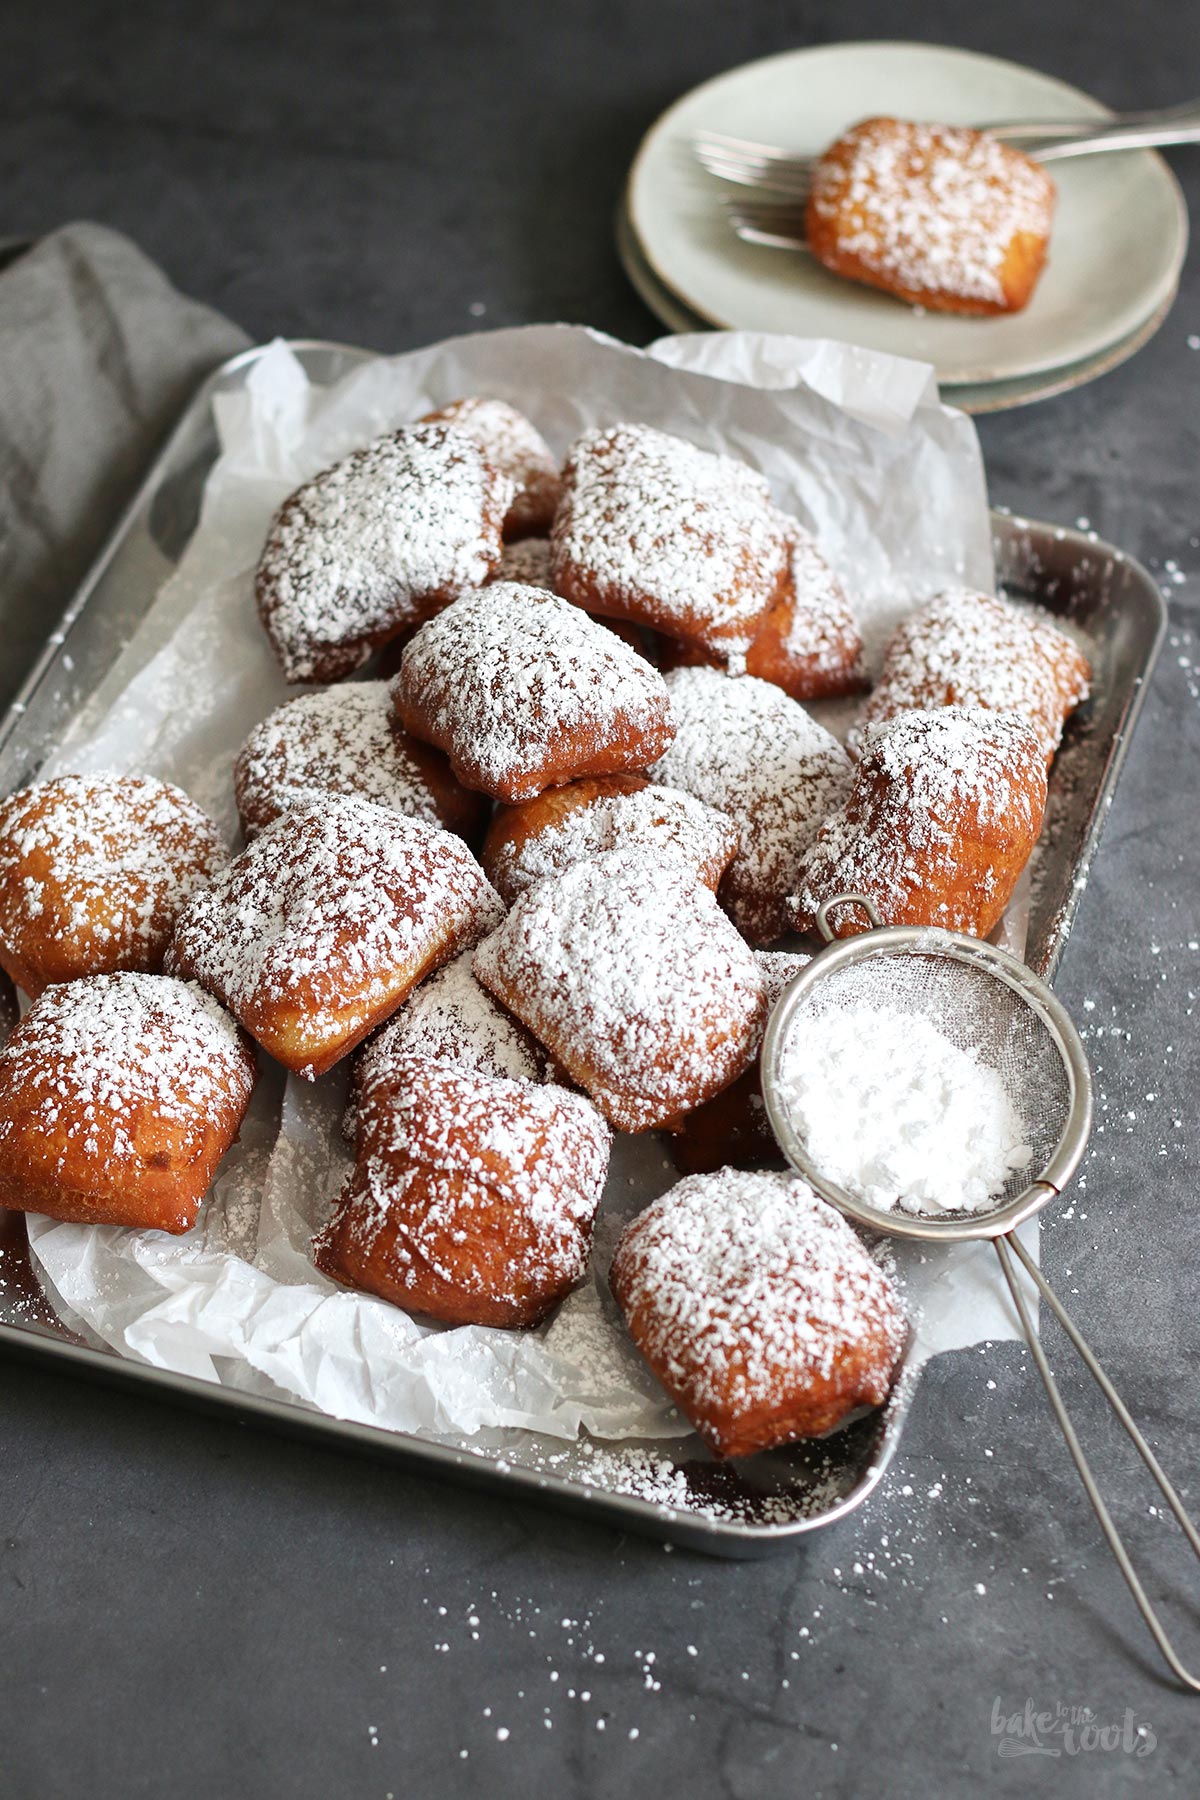 New Orleans Beignets | Bake to the roots